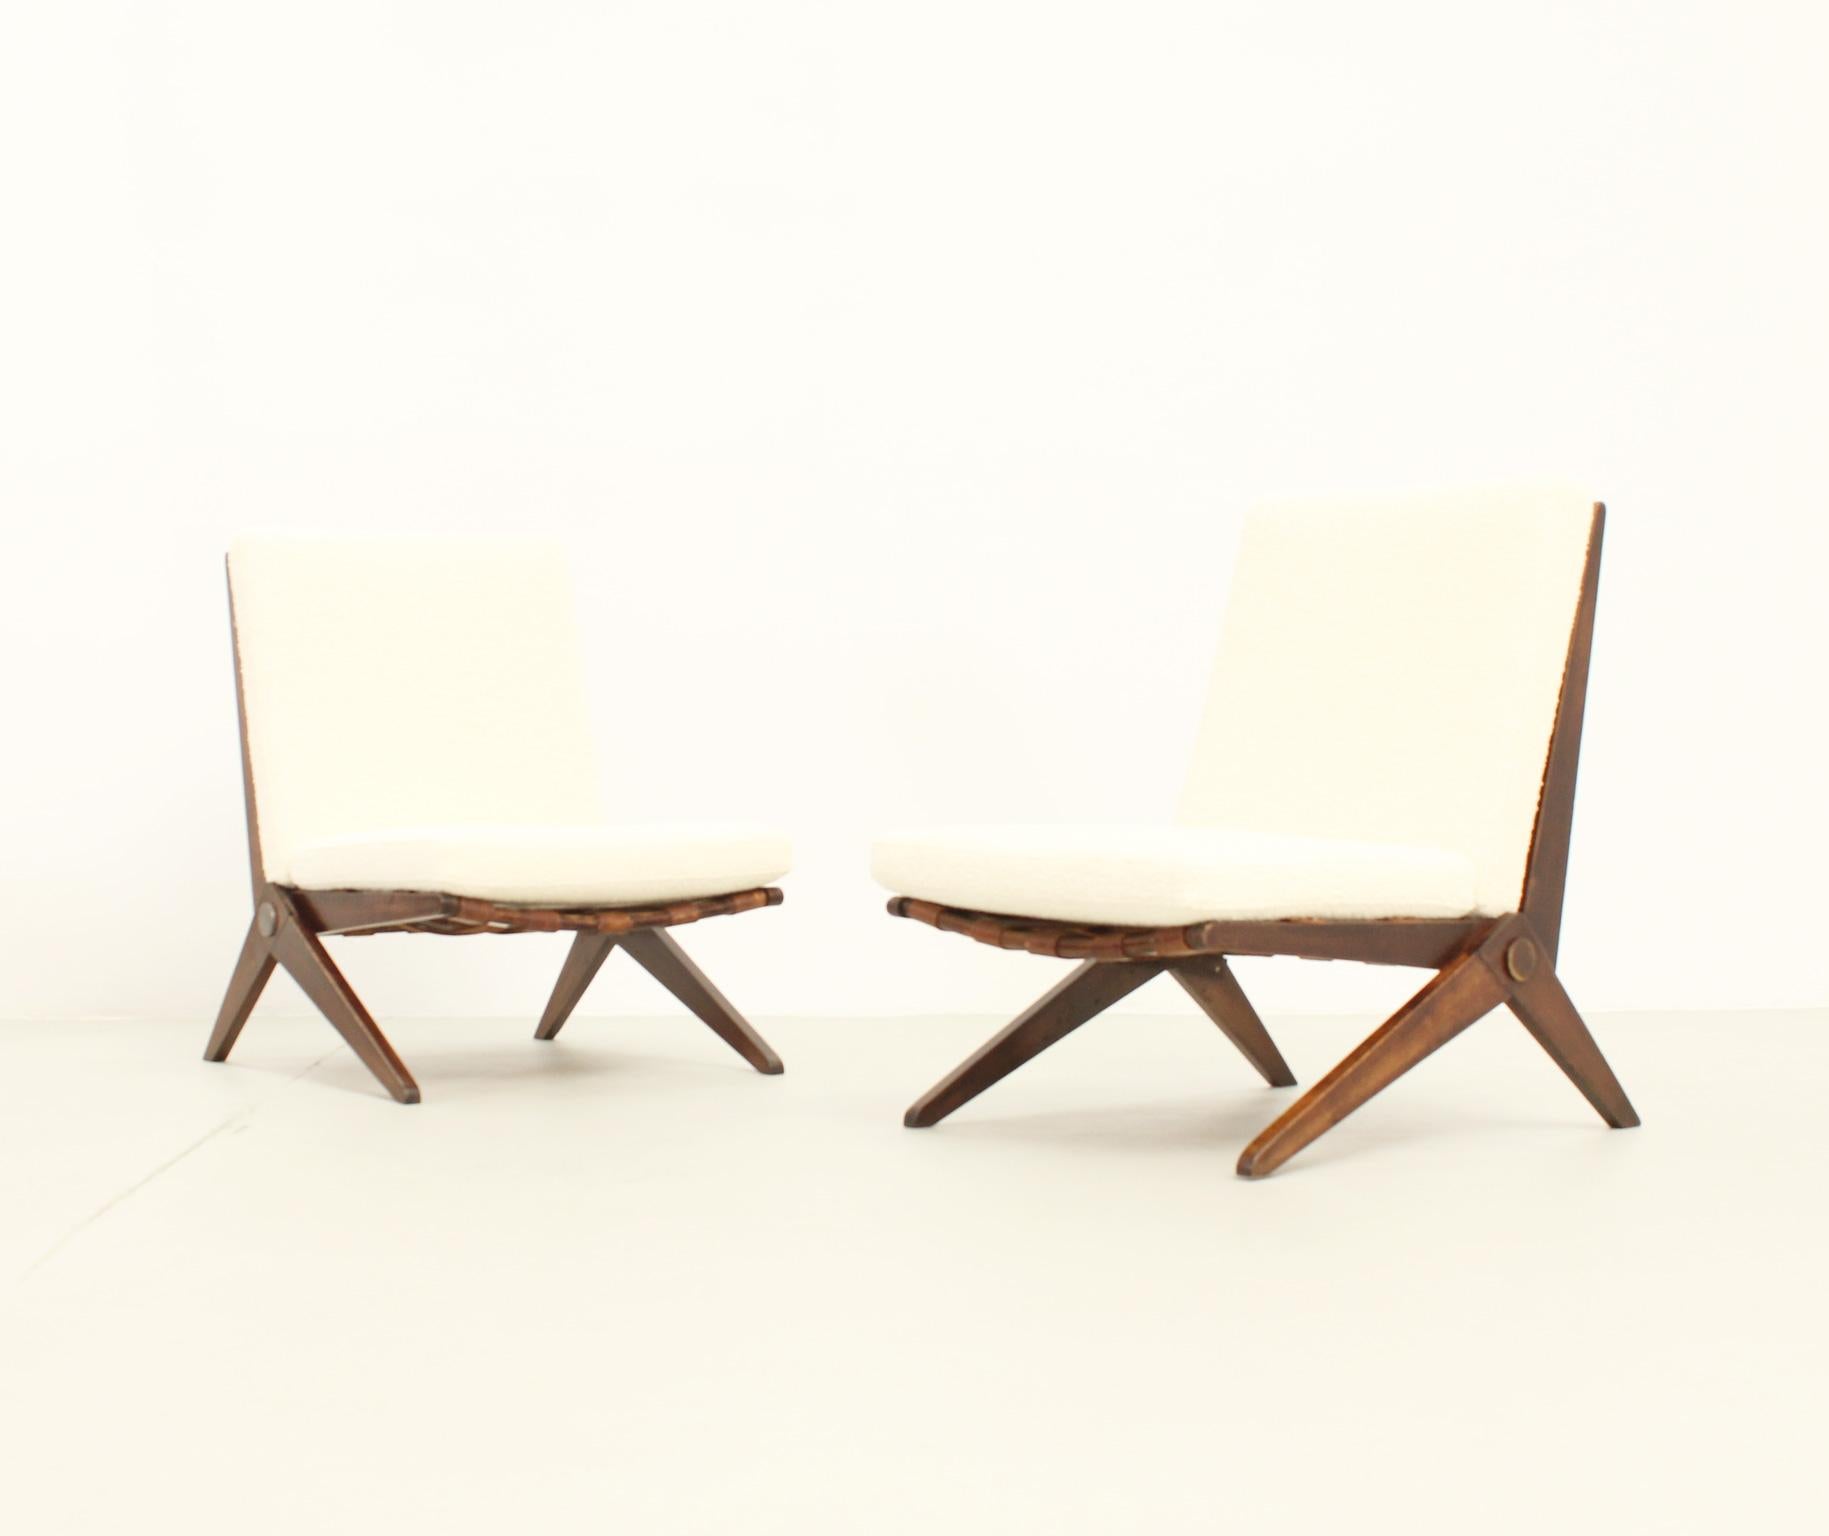 French Pair of Scissors Chairs by Pierre Jeanneret for Knoll, 1948